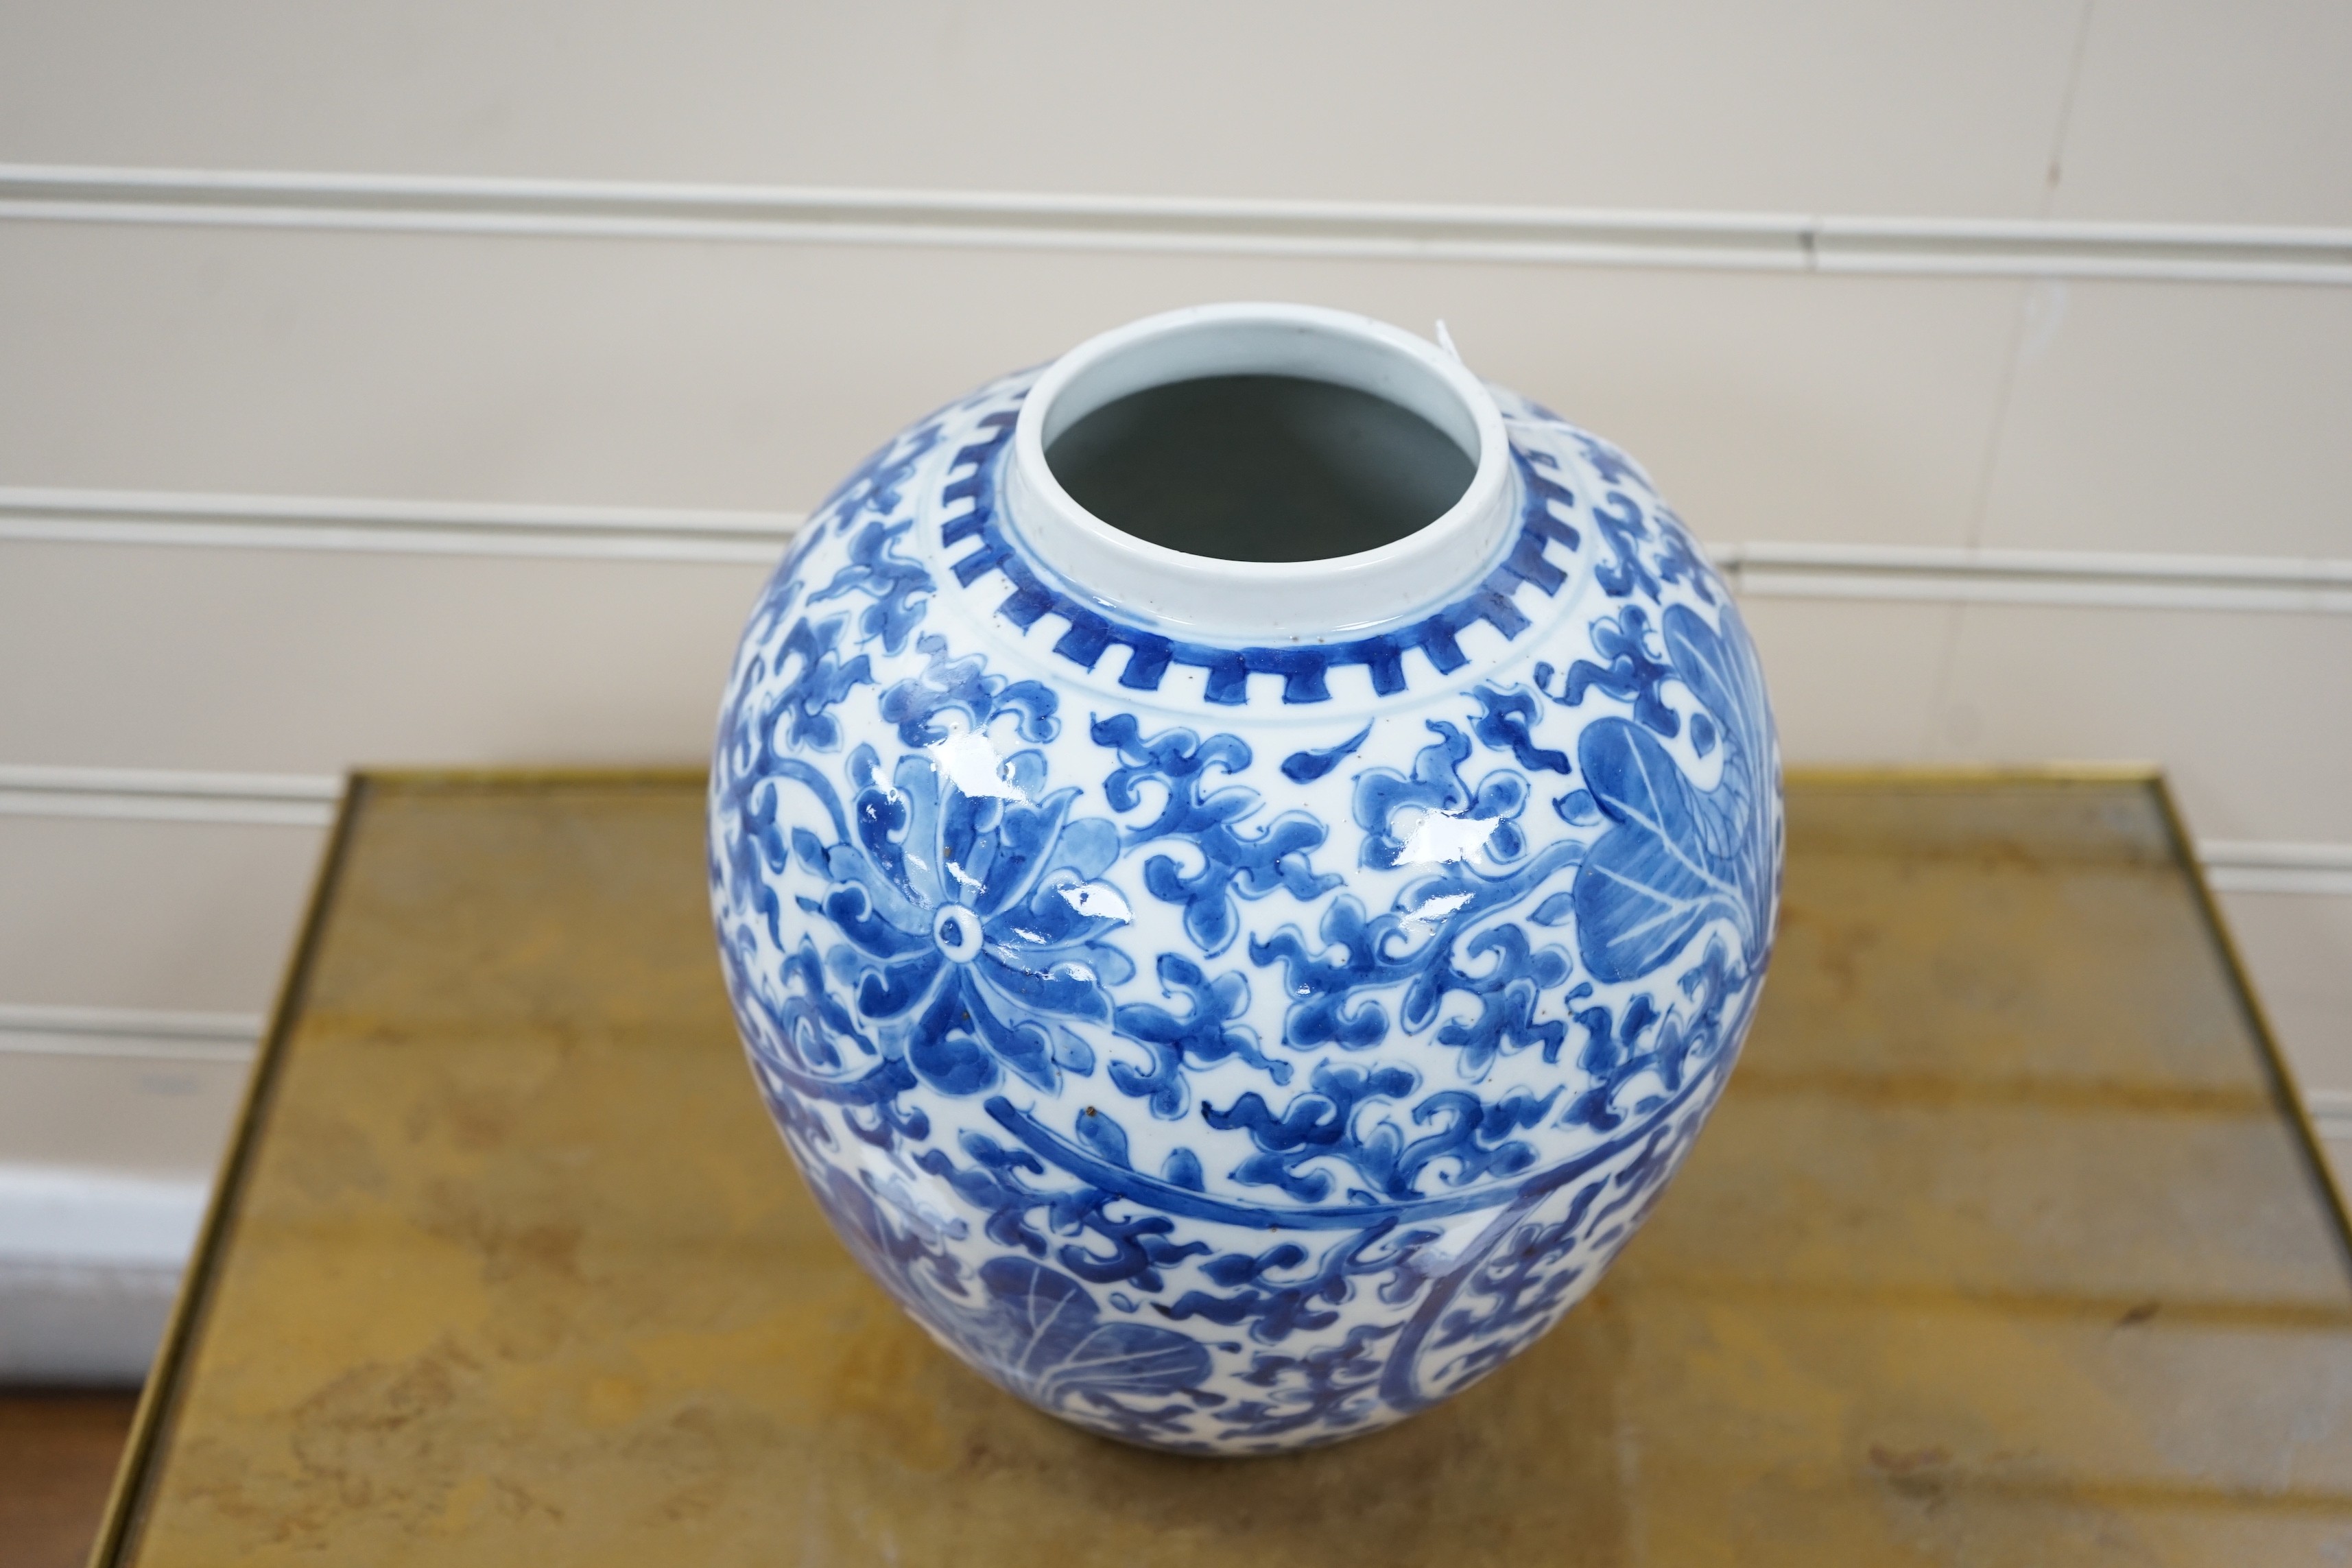 A late 19th century Chinese blue and white ovoid jar. 22cm tall, apocryphal Kangxi mark